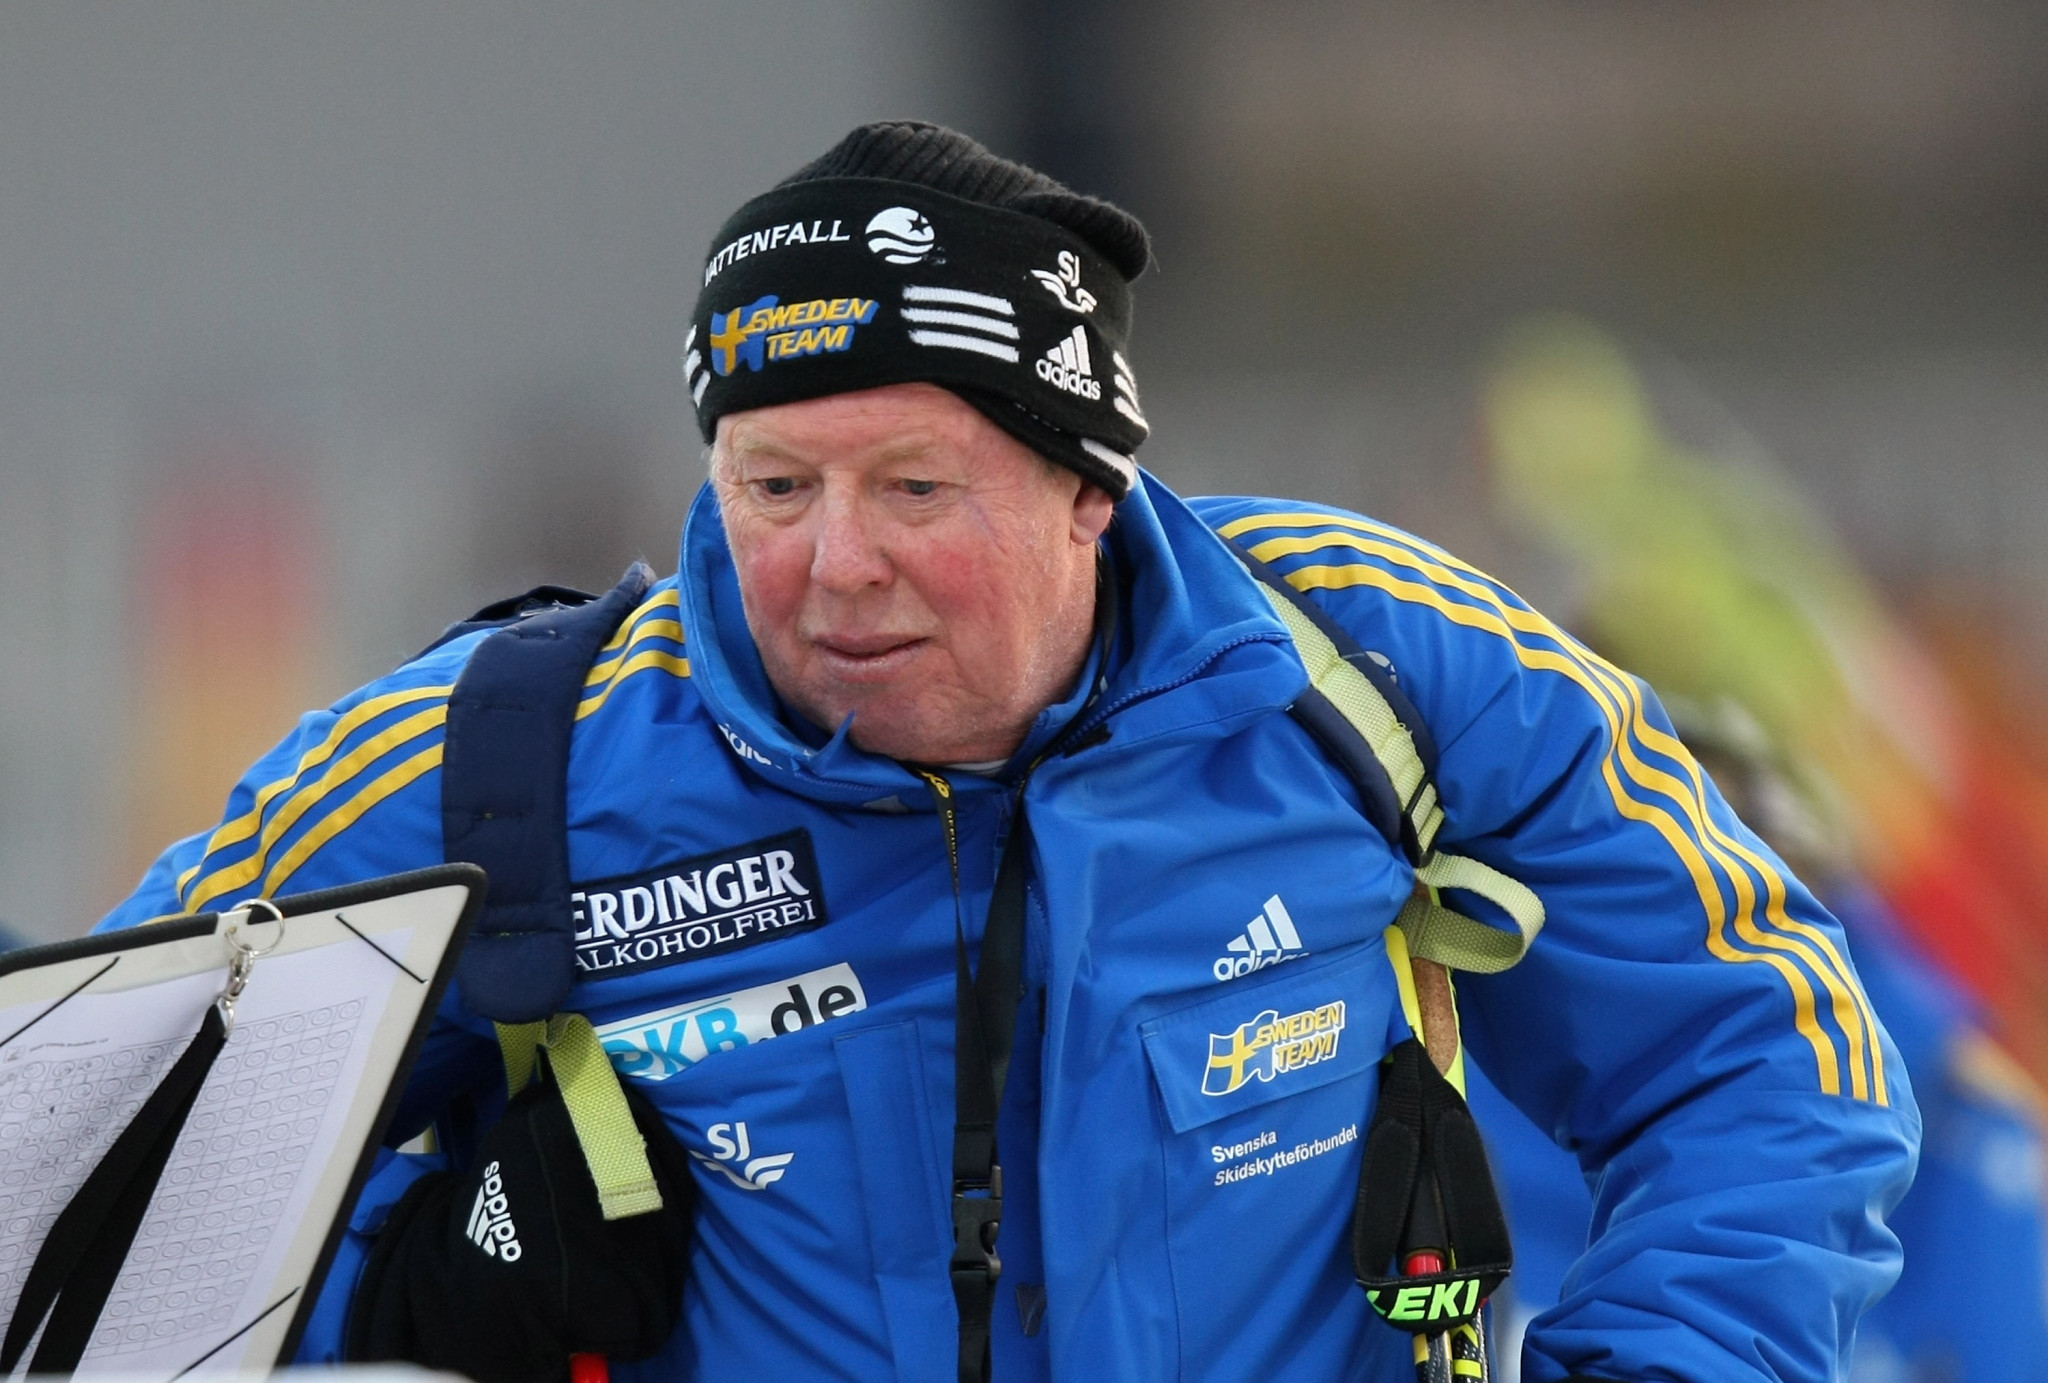 Swedish biathlon coach considering legal action after being denied accreditation for Pyeongchang 2018